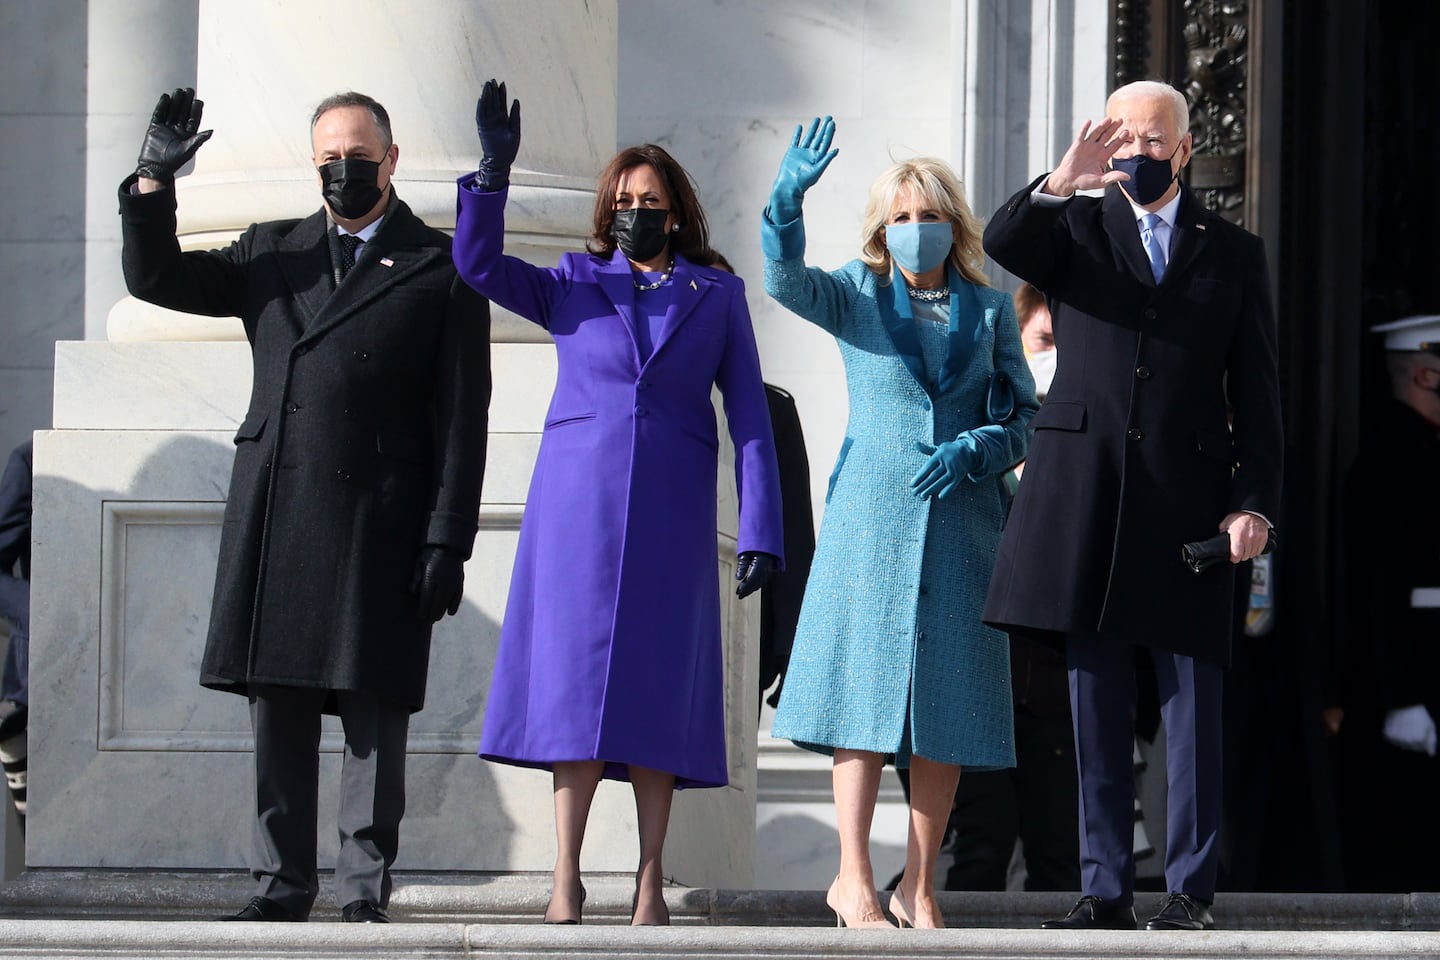 Doug Emhoff, Vice President-elect Kamala Harris, Jill Biden and President-elect Joe Biden wave as they arrive on the East Front at the inauguration. Joe Raedle/Getty Images